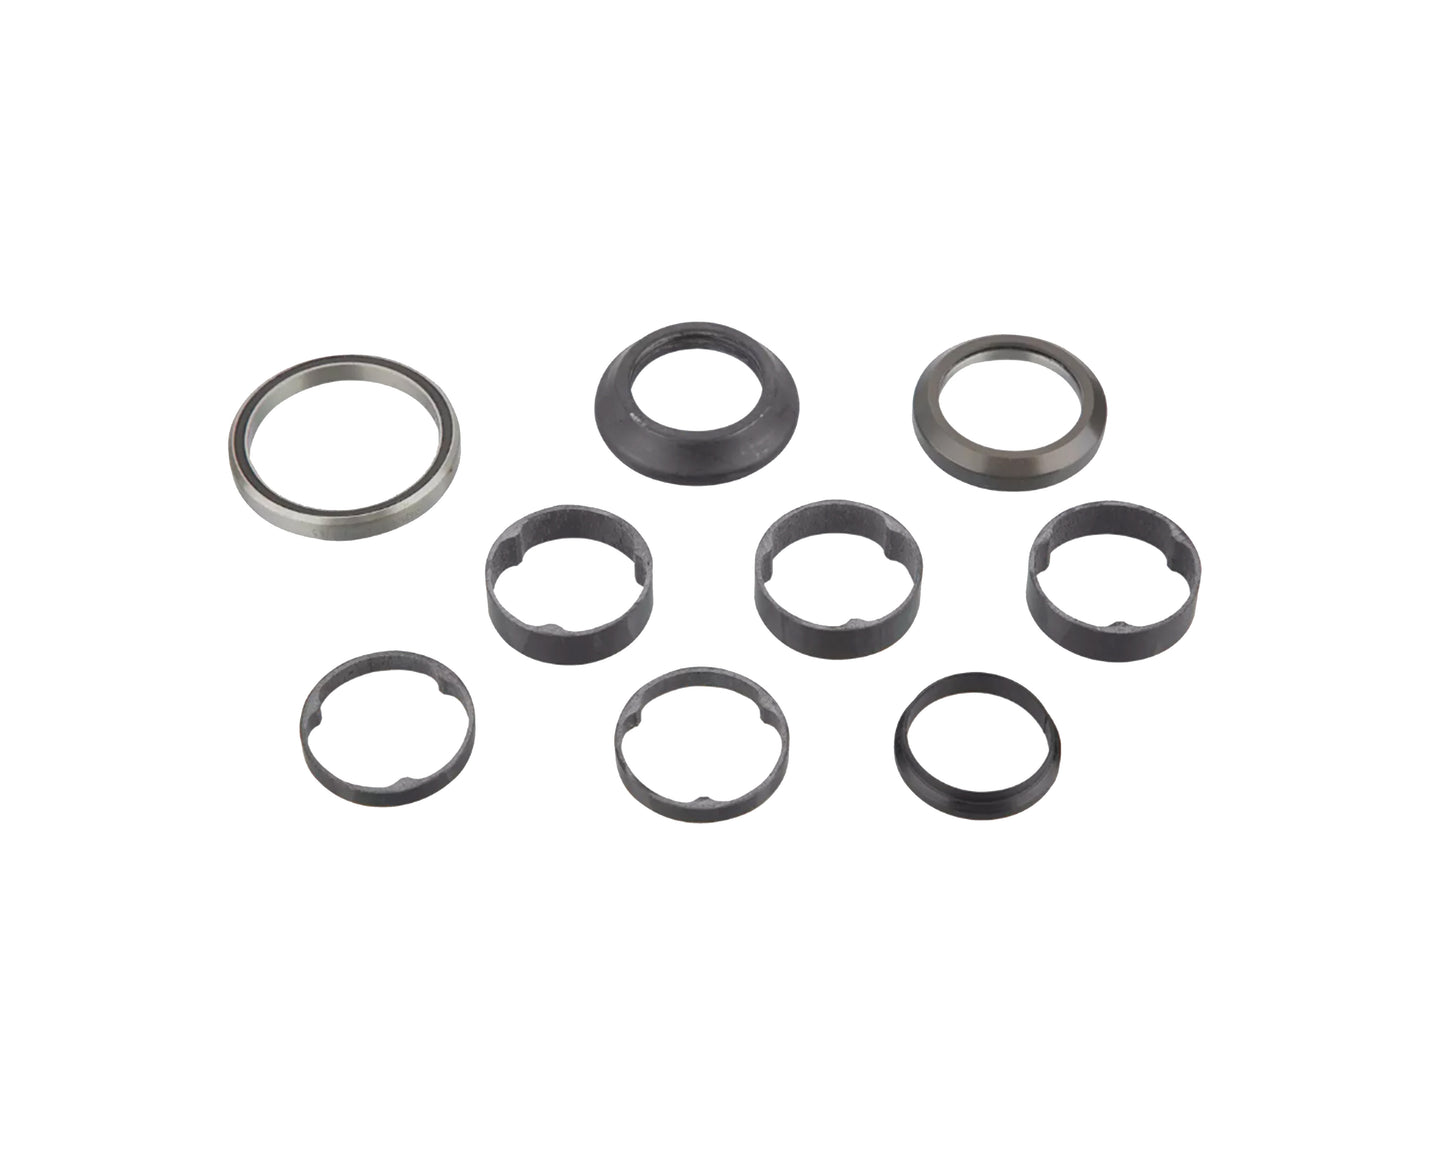 Specialized Headset Compression Ring Upper 41.8X30.5X8X45 HB Bearing Lower 49.5X40.5X6.5 STD Bearing